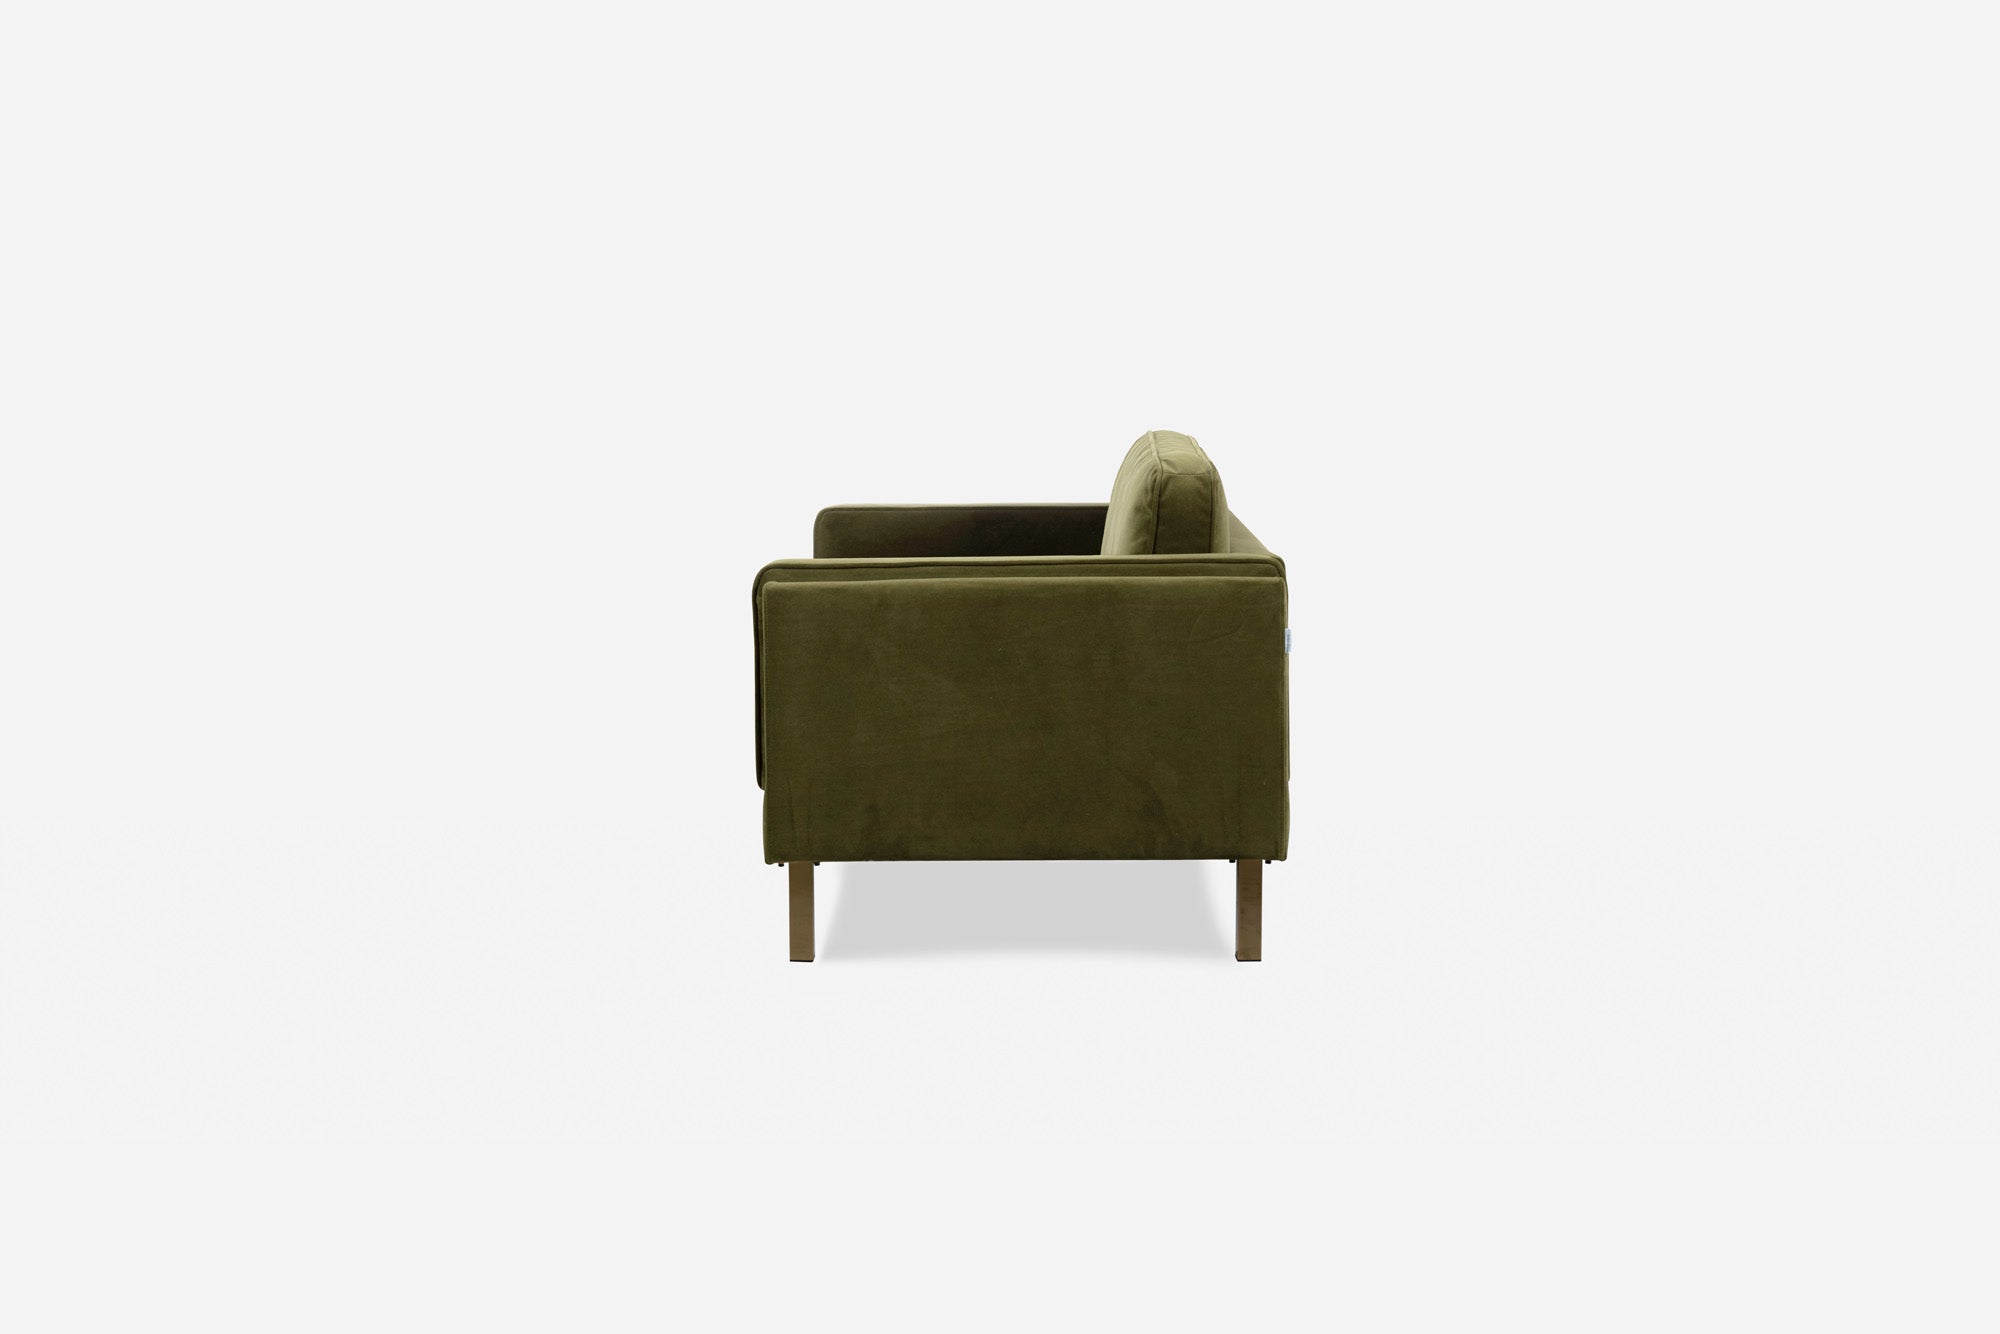 albany armchair shown in olive velvet with gold legs